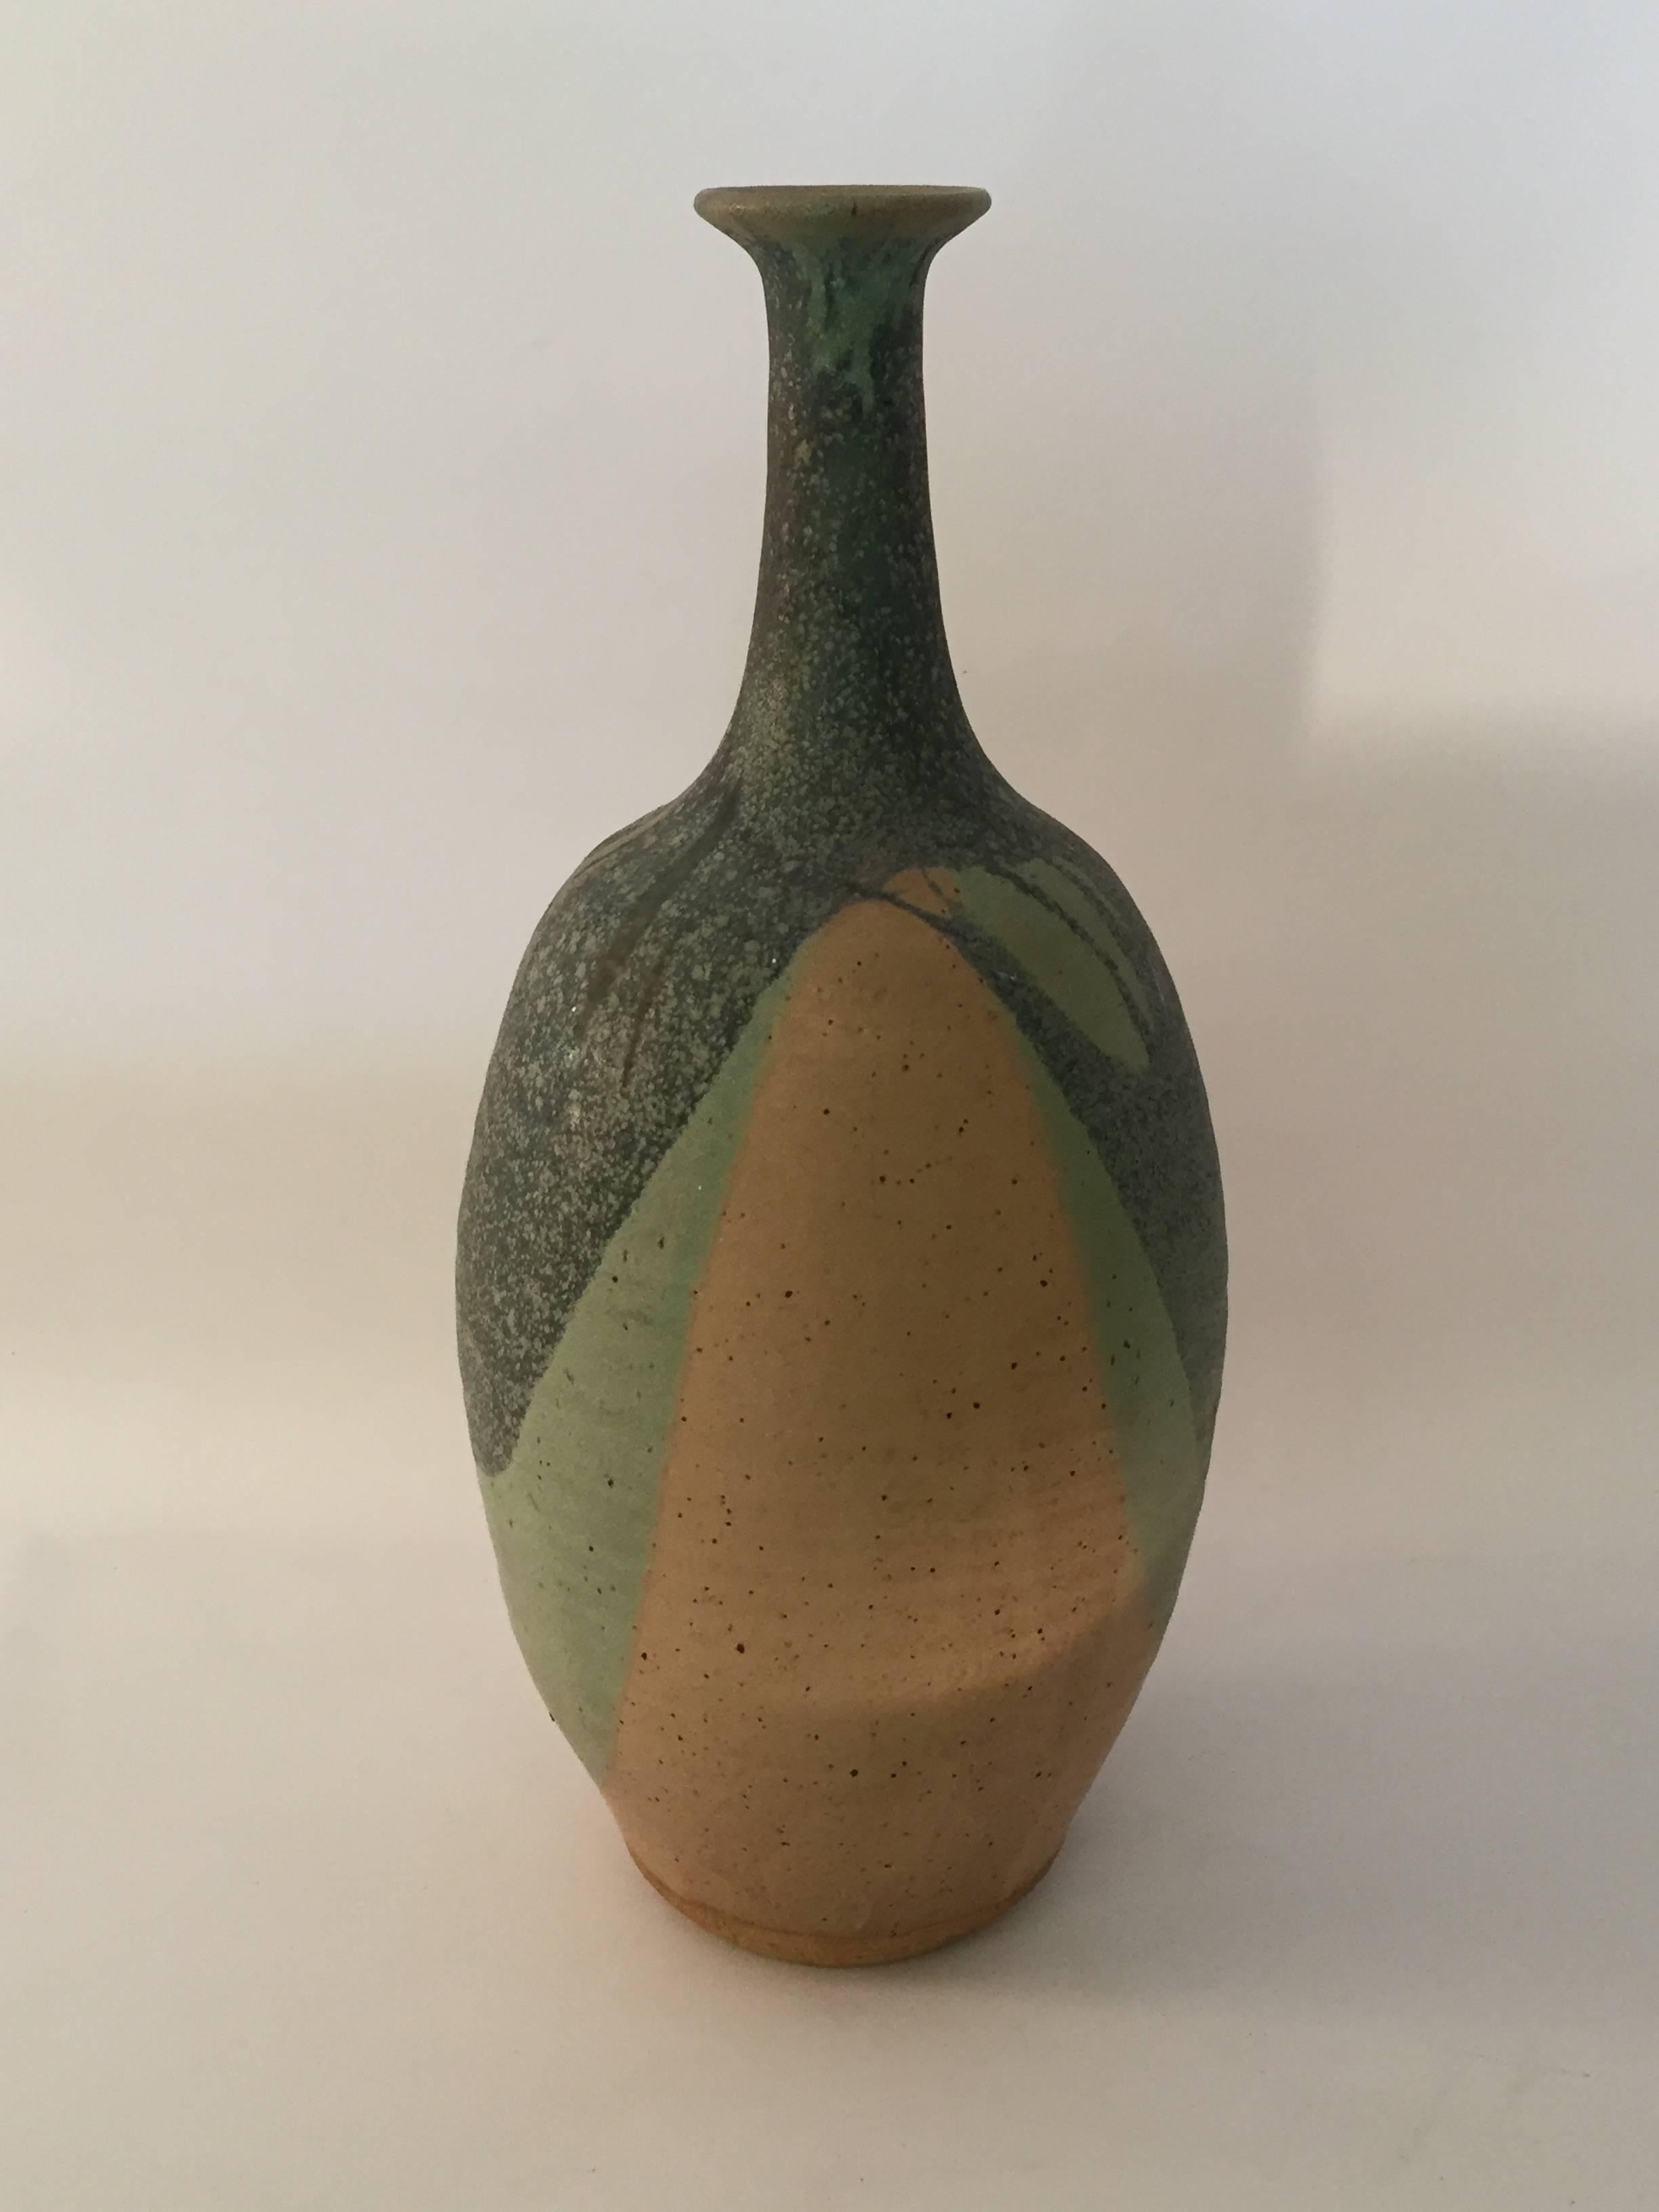 John Masson's pottery is in many prominent permanent private and museum collections here in the United States. This particular piece was exhibited in 1969 at the Jorgensen Exhibit Hall at The University of Connecticut. Multiple matte glazes adorn